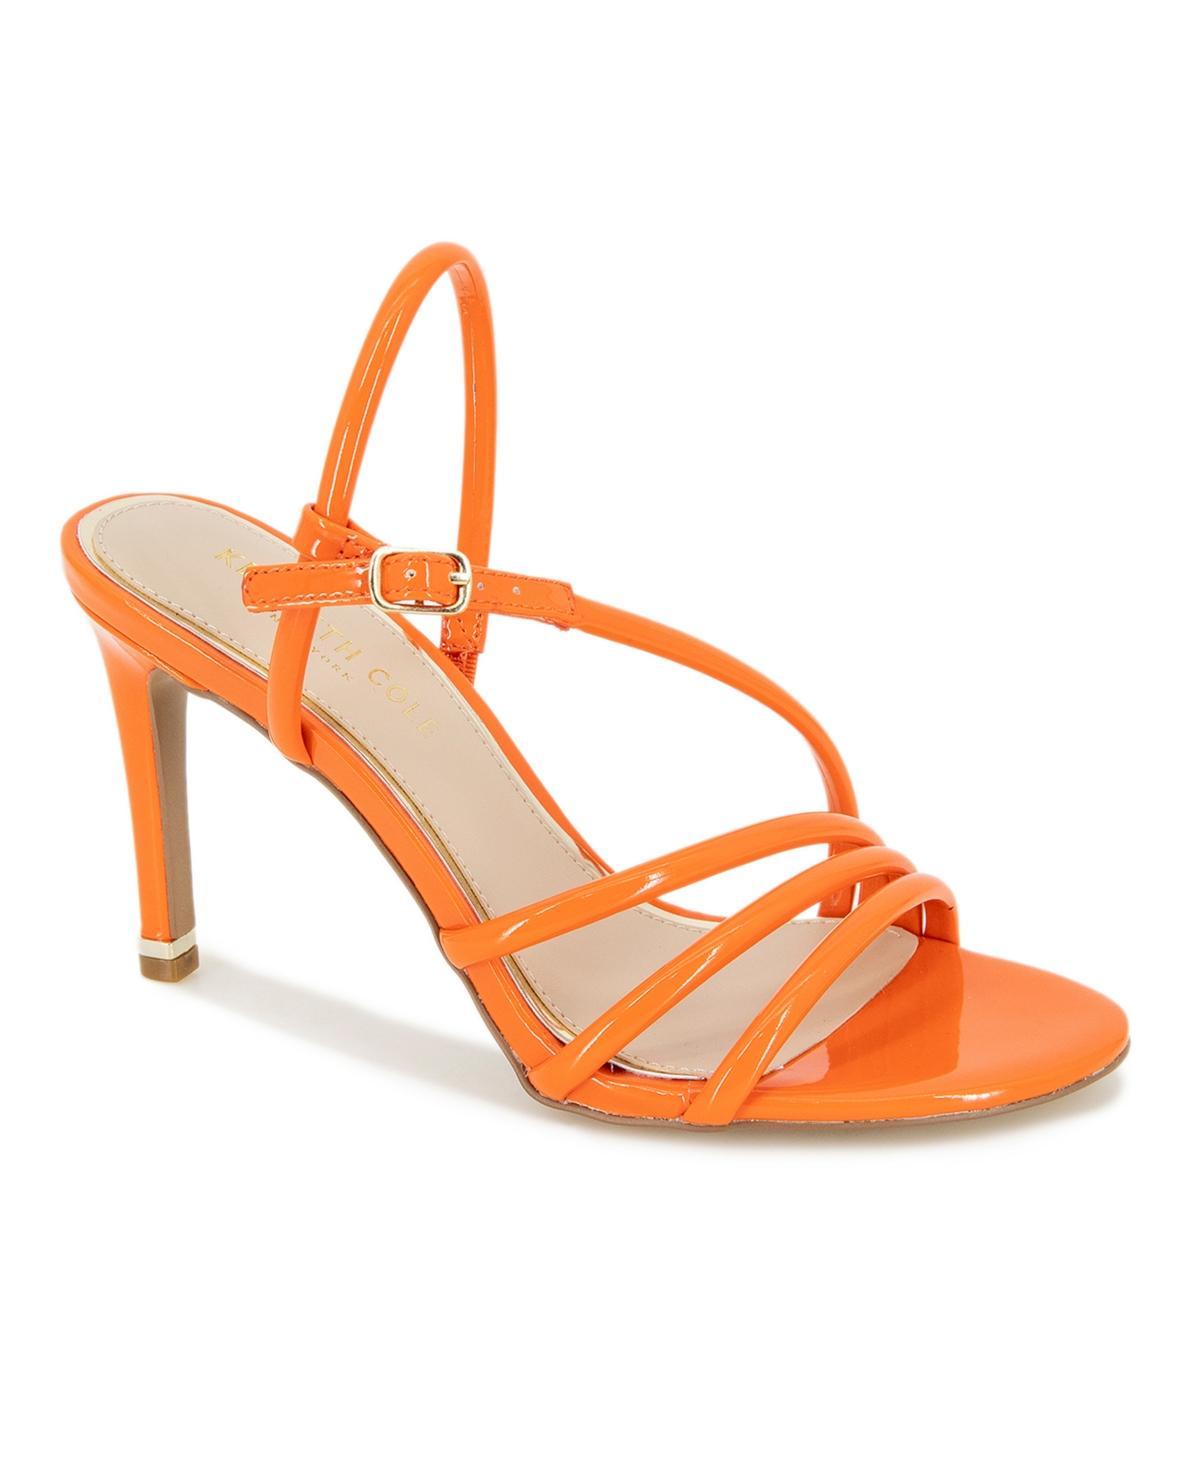 Kenneth Cole New York Womens Baxley Dress Sandals Womens Shoes Product Image